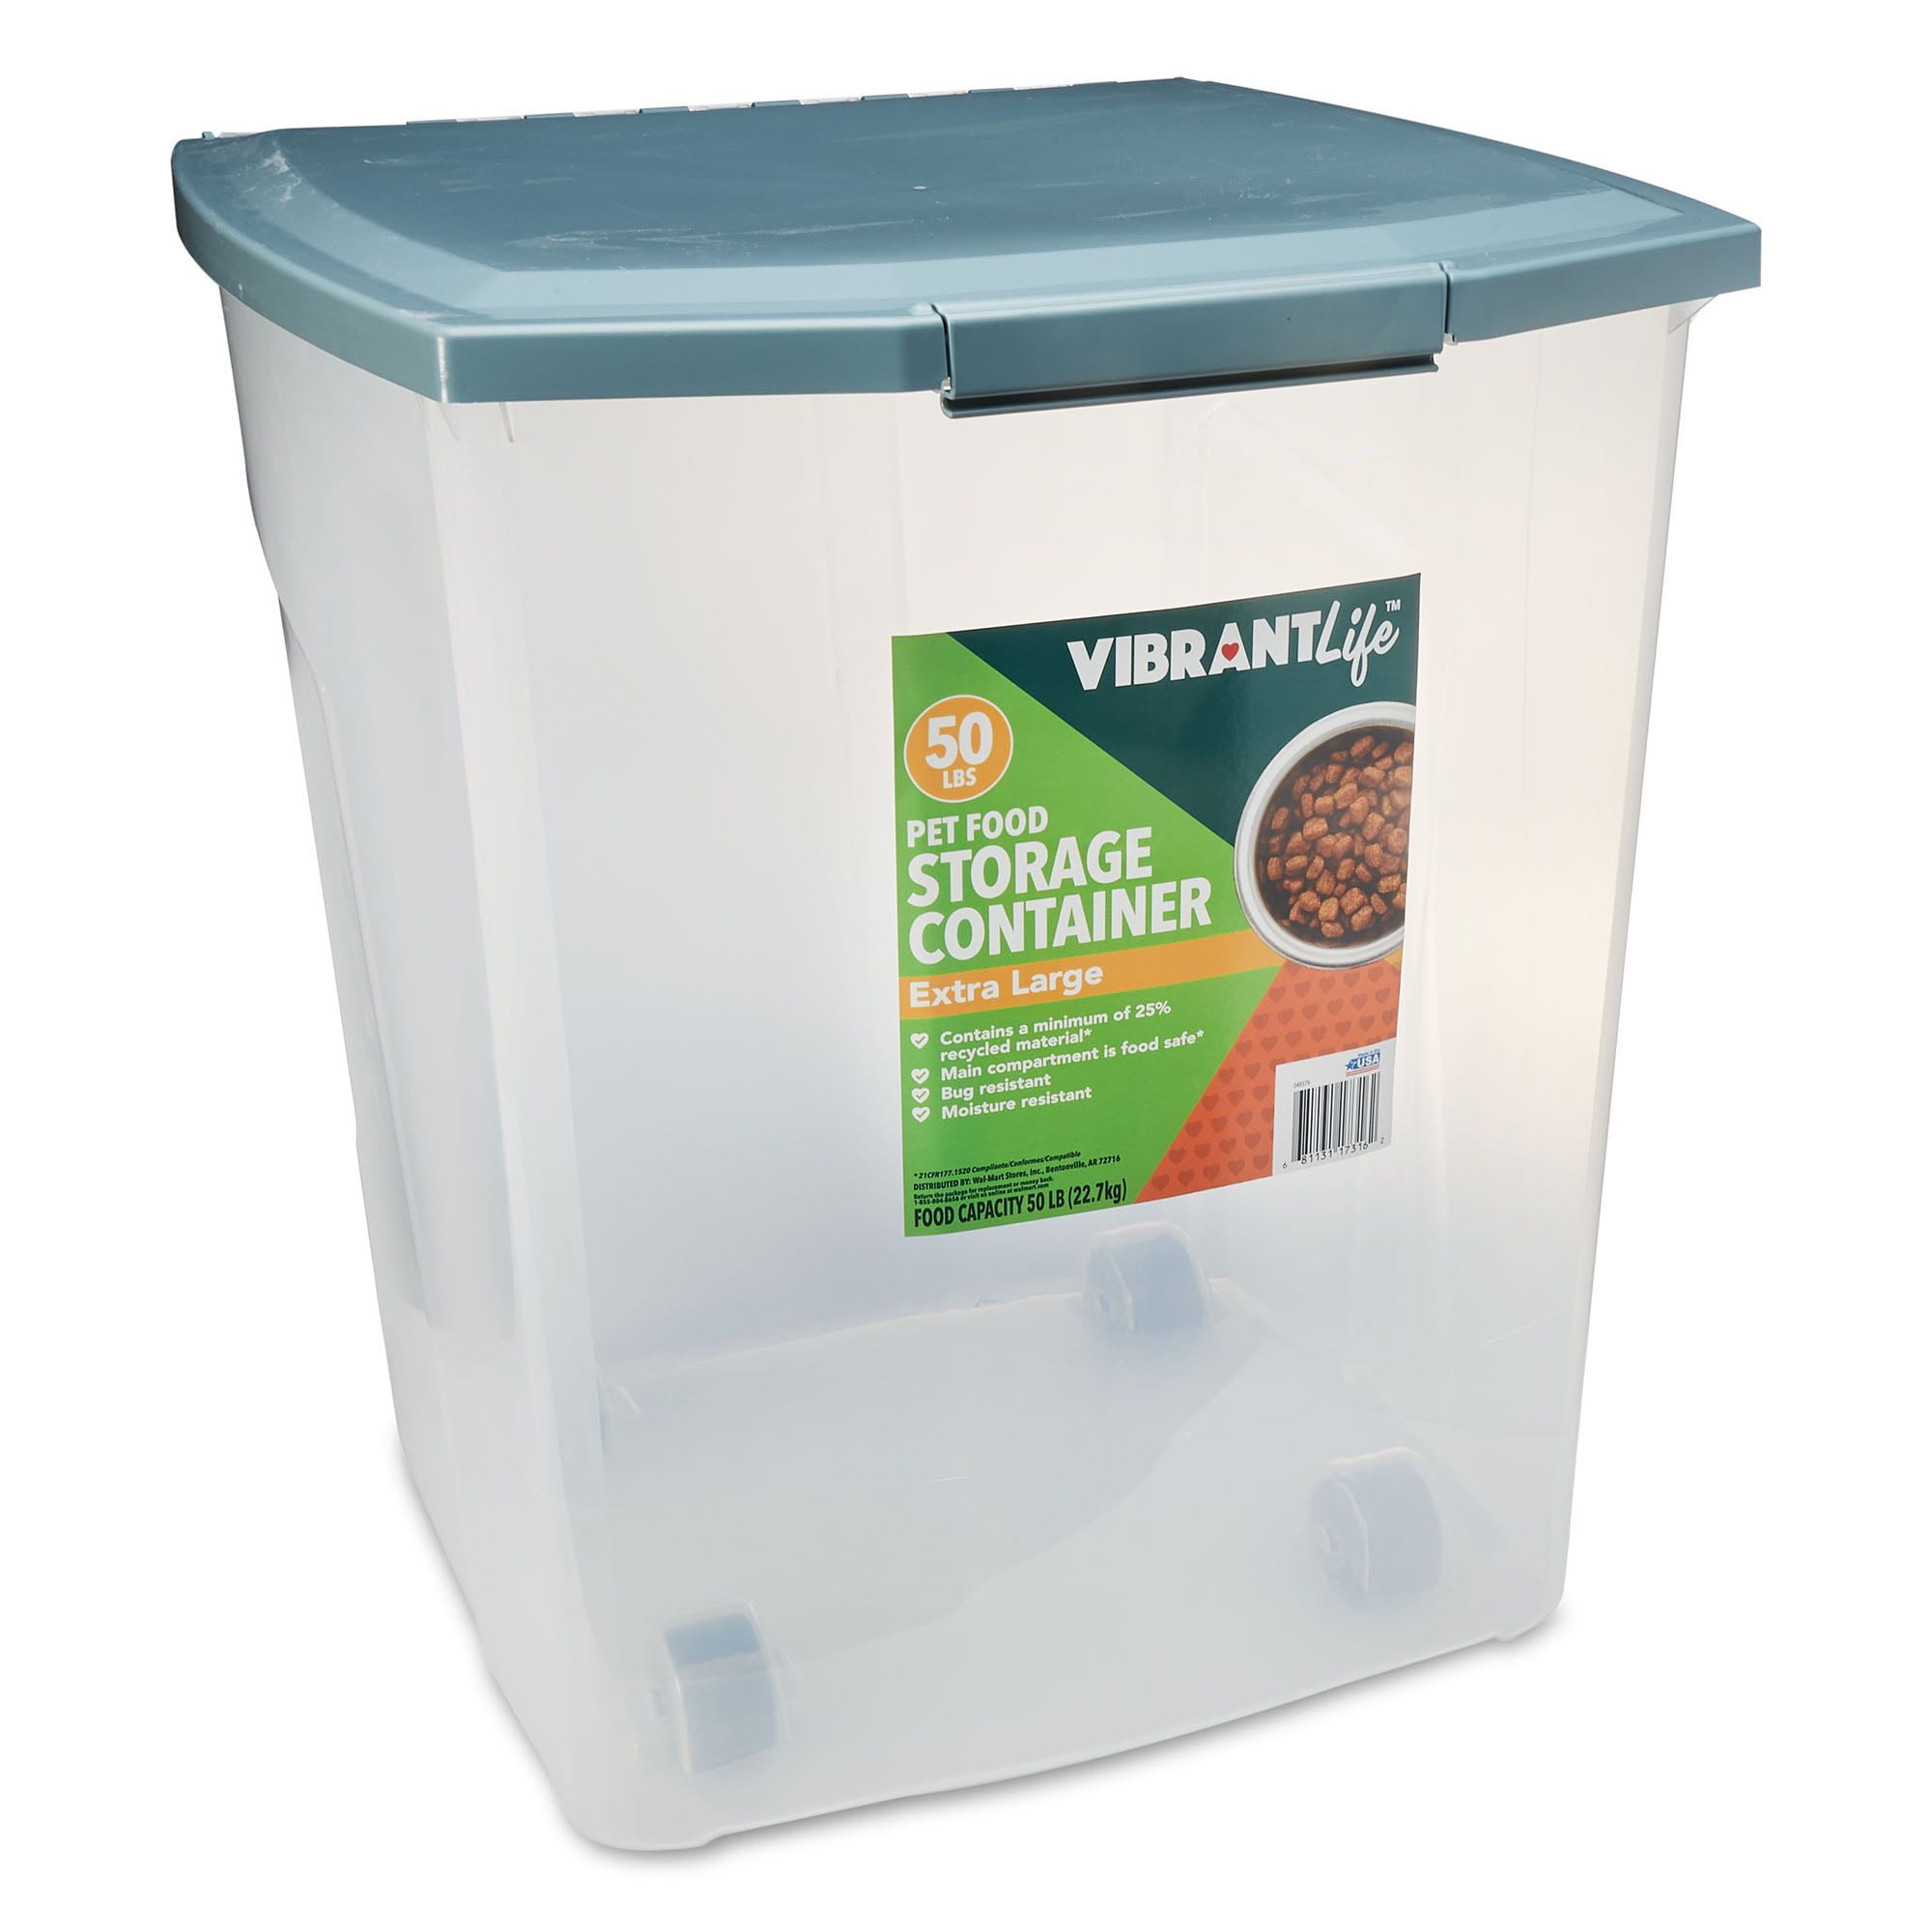 Lb dog food container